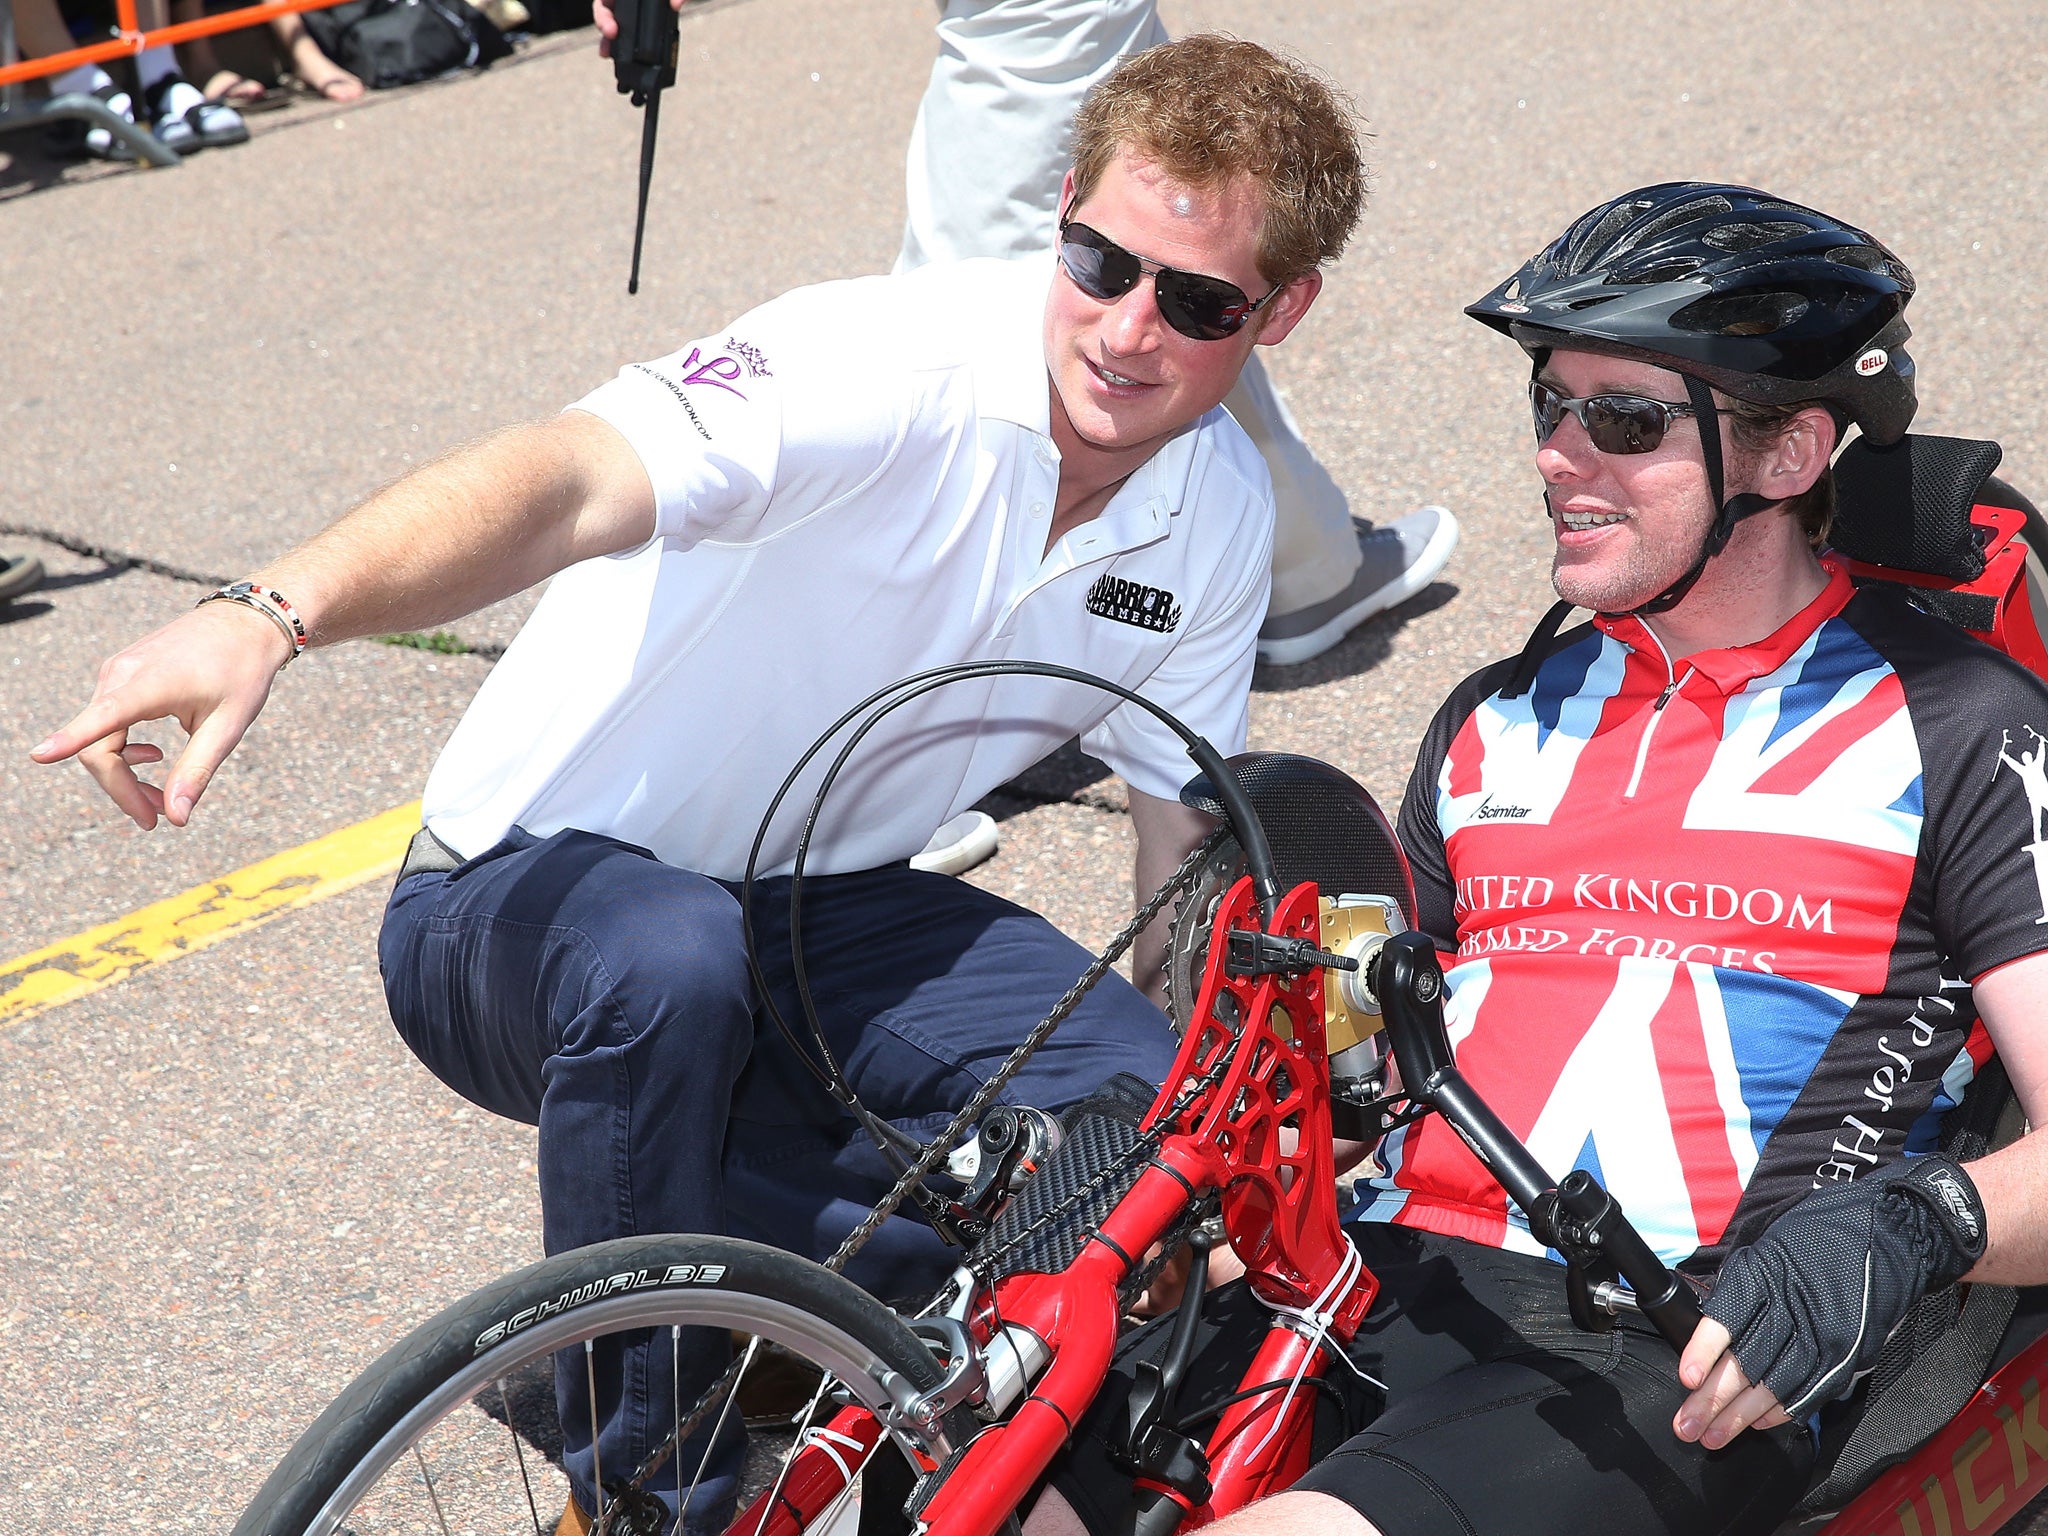 Prince Harry at the Warrior Games during his May 2013 visit to the US